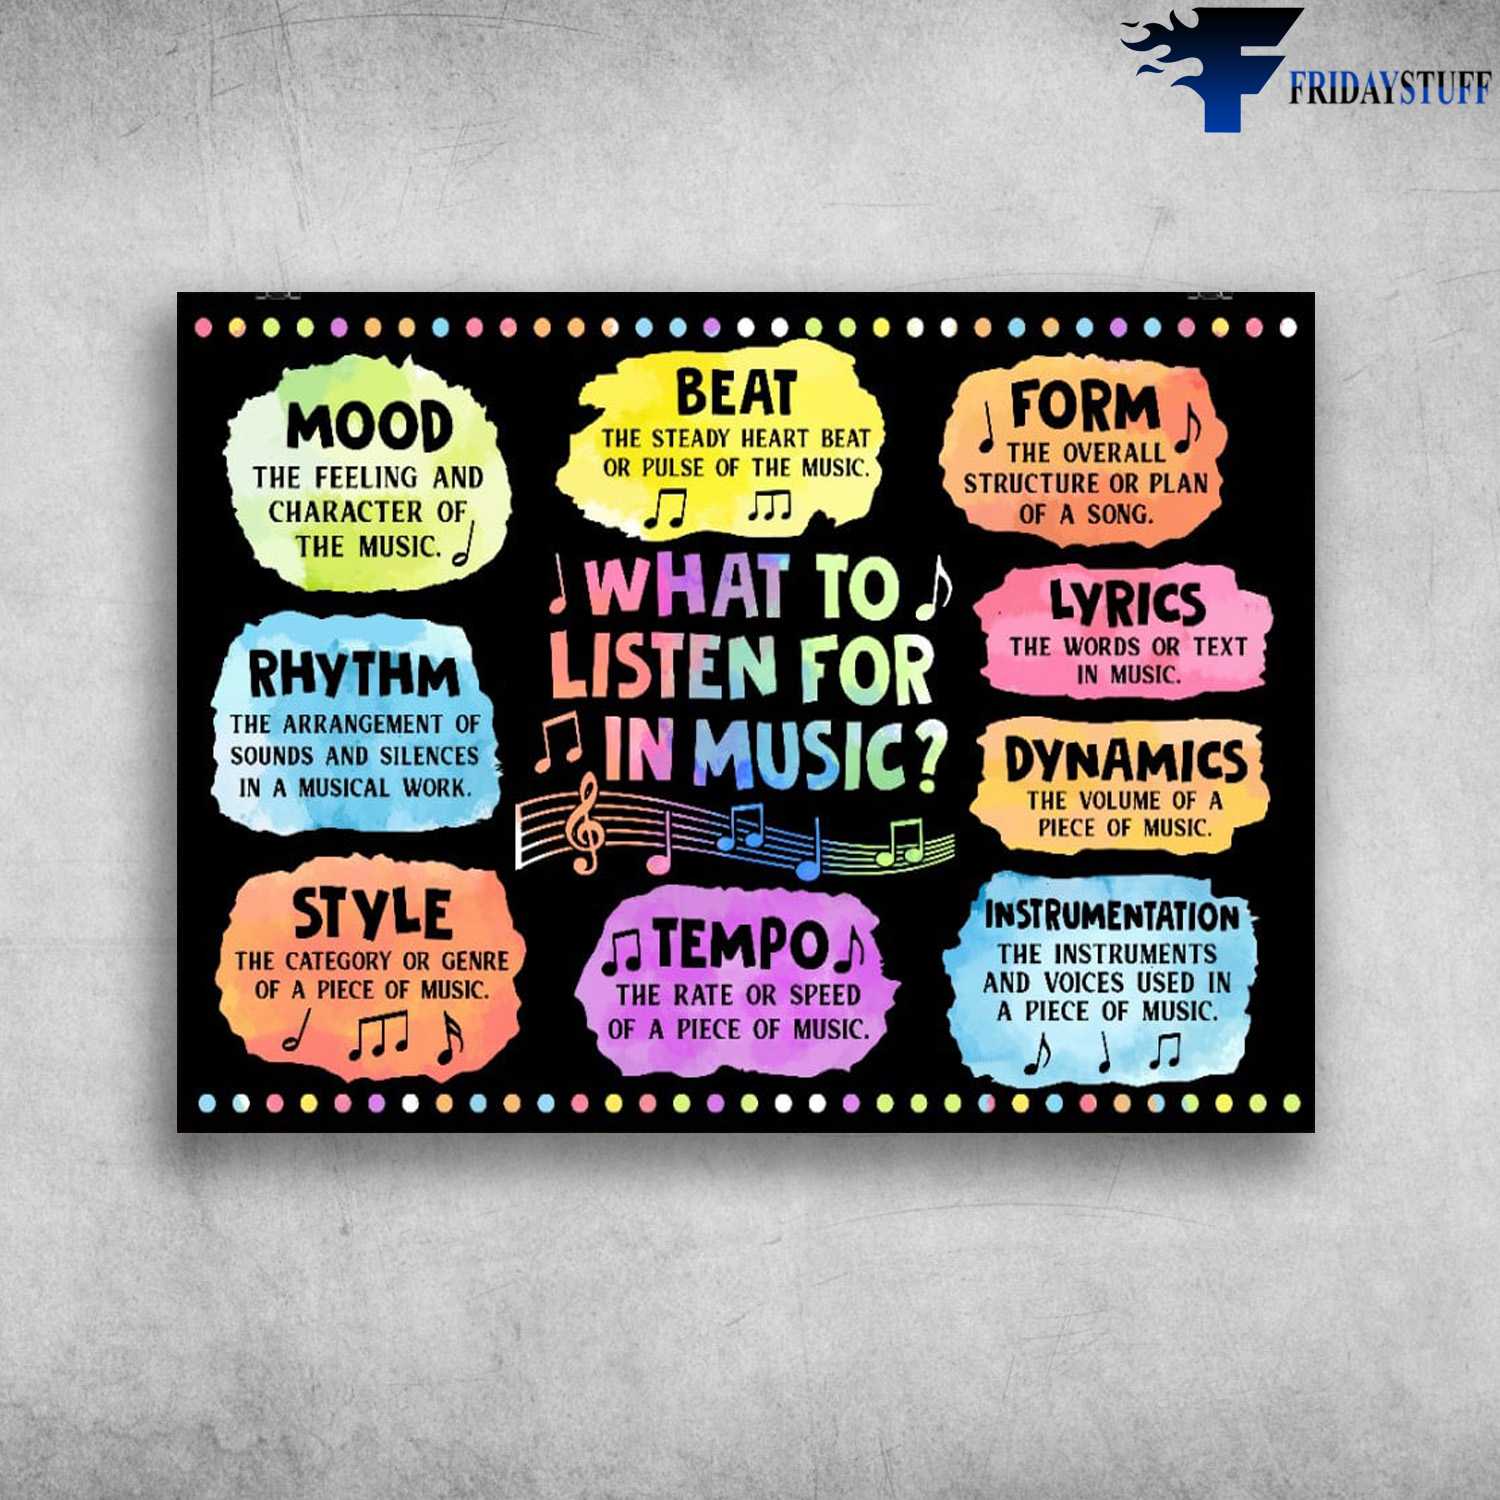 Back To School - Music Class, What To Listen For In Music, Mood The Feeling And Character Of The Music, Beat The Steady Heart Beat Or Pulse Of The Music, Form The Overall Structure Or Plan Of A Song